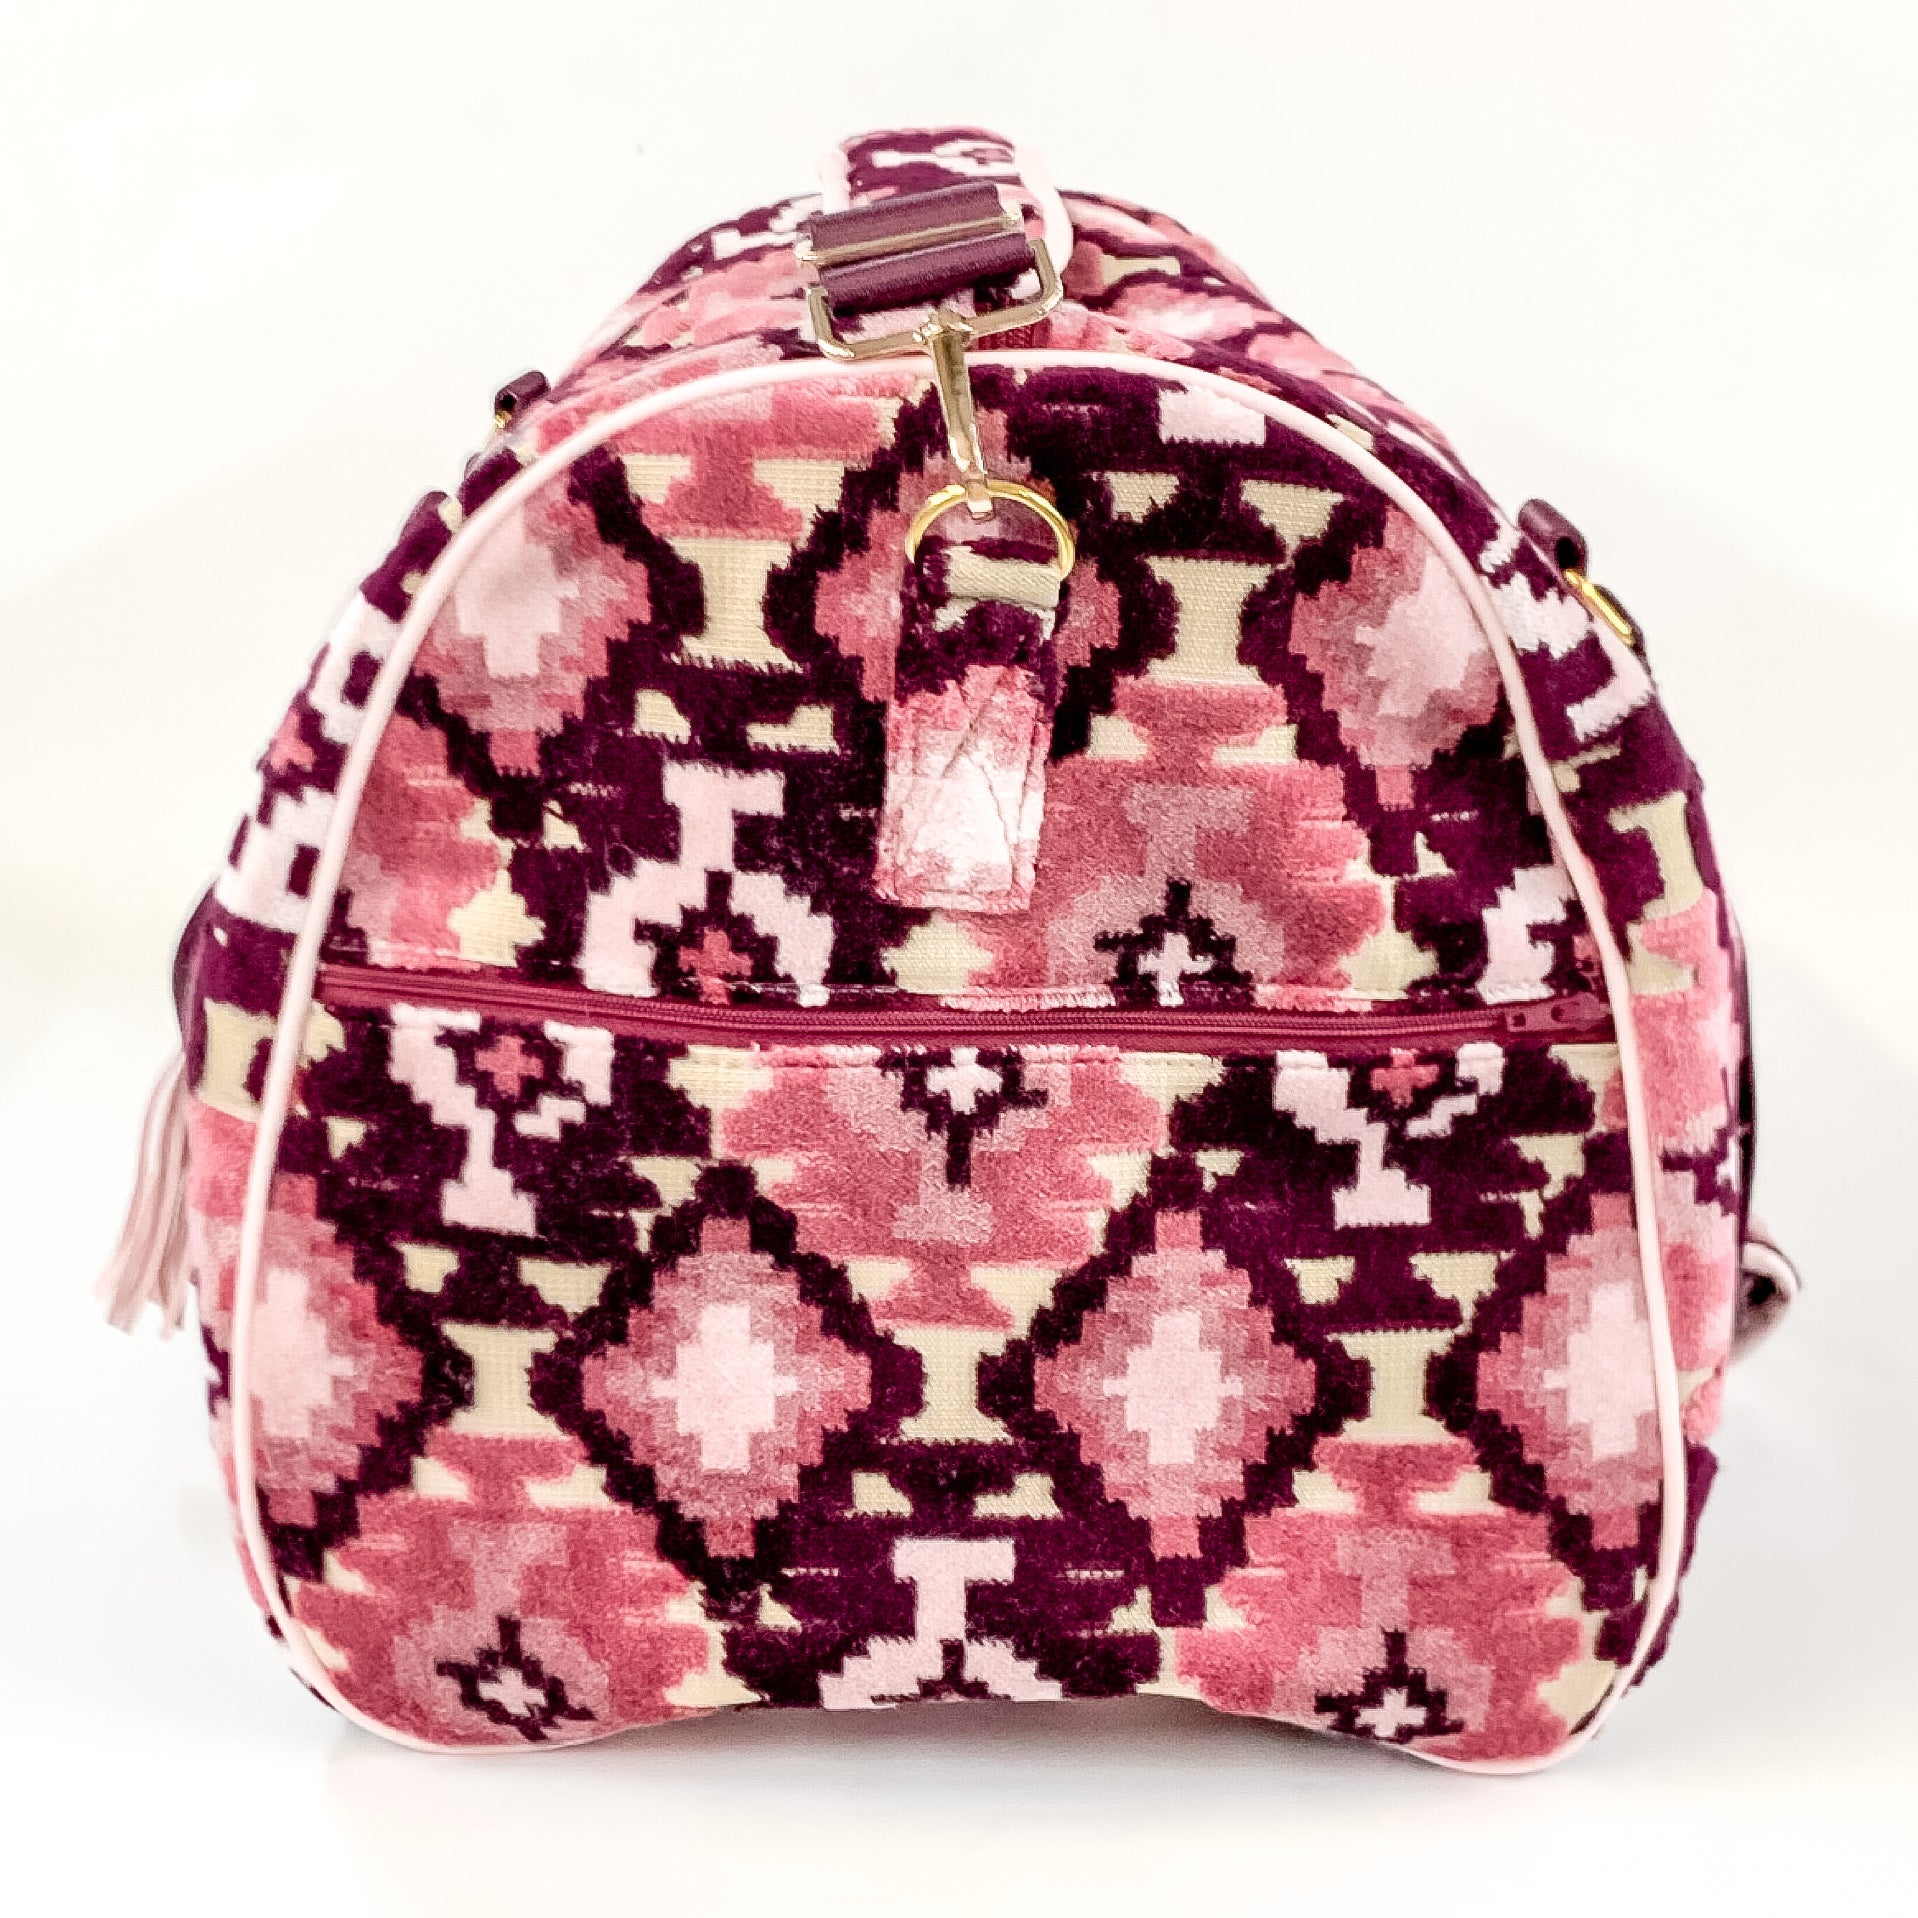 Makeup Junkie | Maroon Aztec Duffel Bag in Maroon and Pink Mix - Giddy Up Glamour Boutique